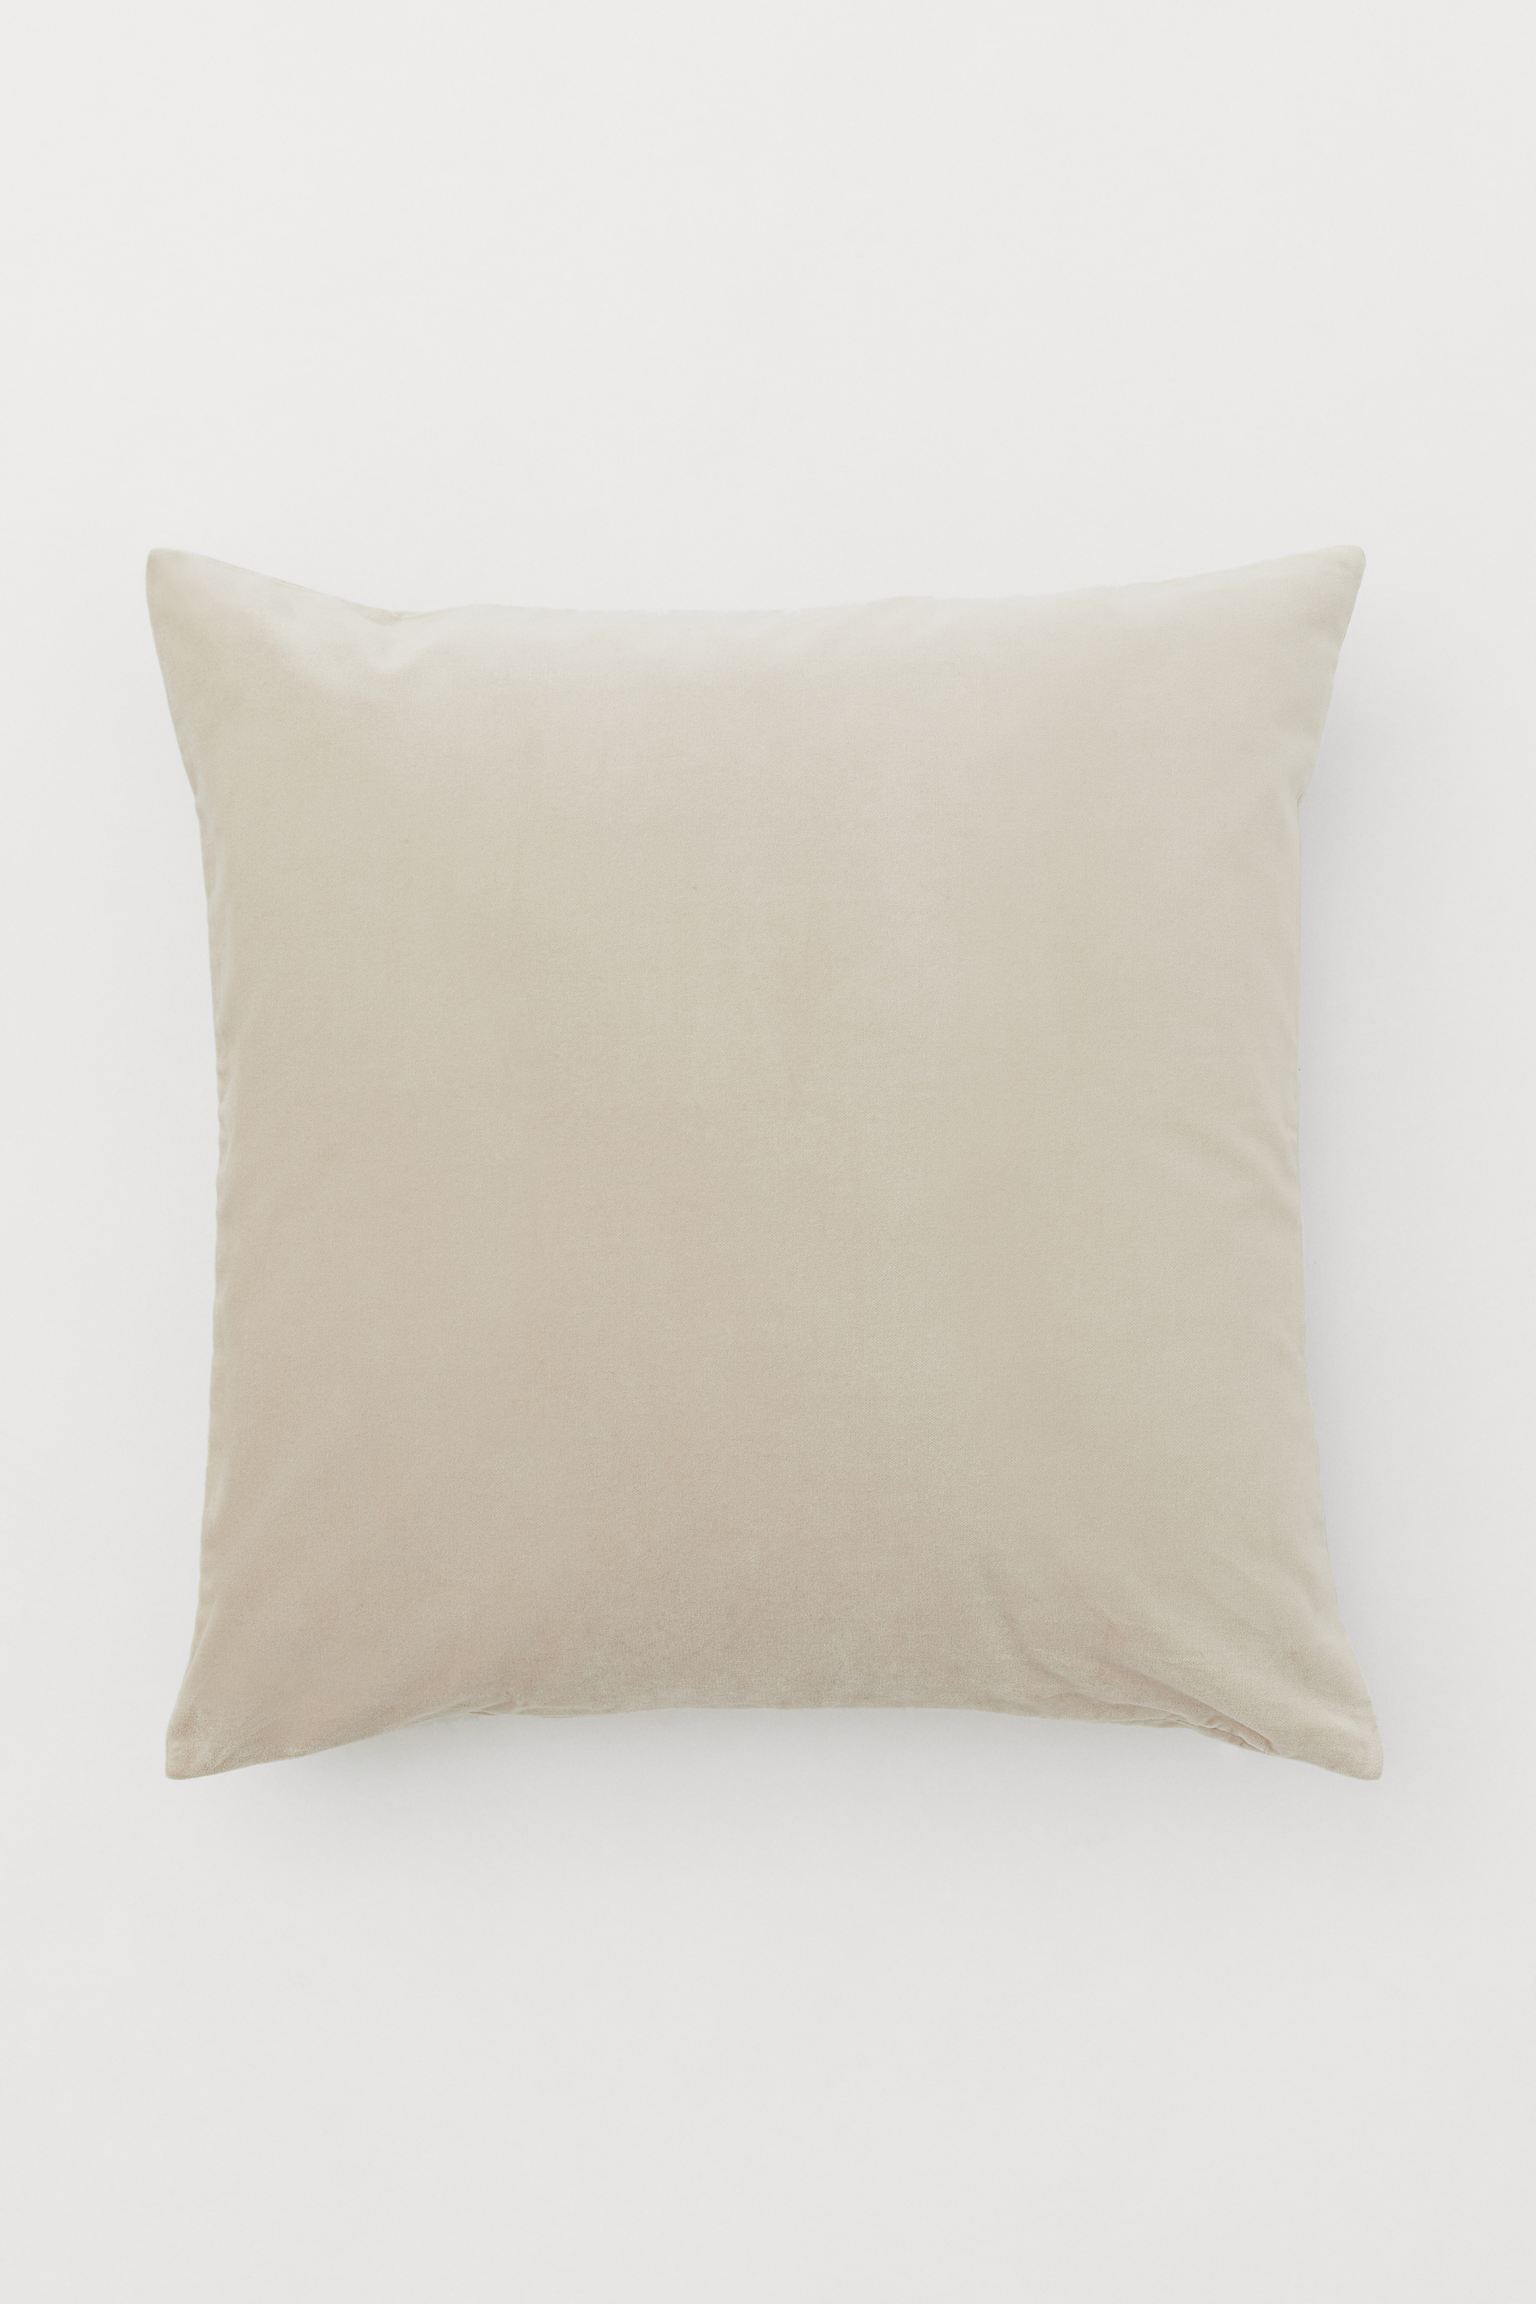 Outdoor Pillow Covers With Zippers, Easy-use, Affordable Style